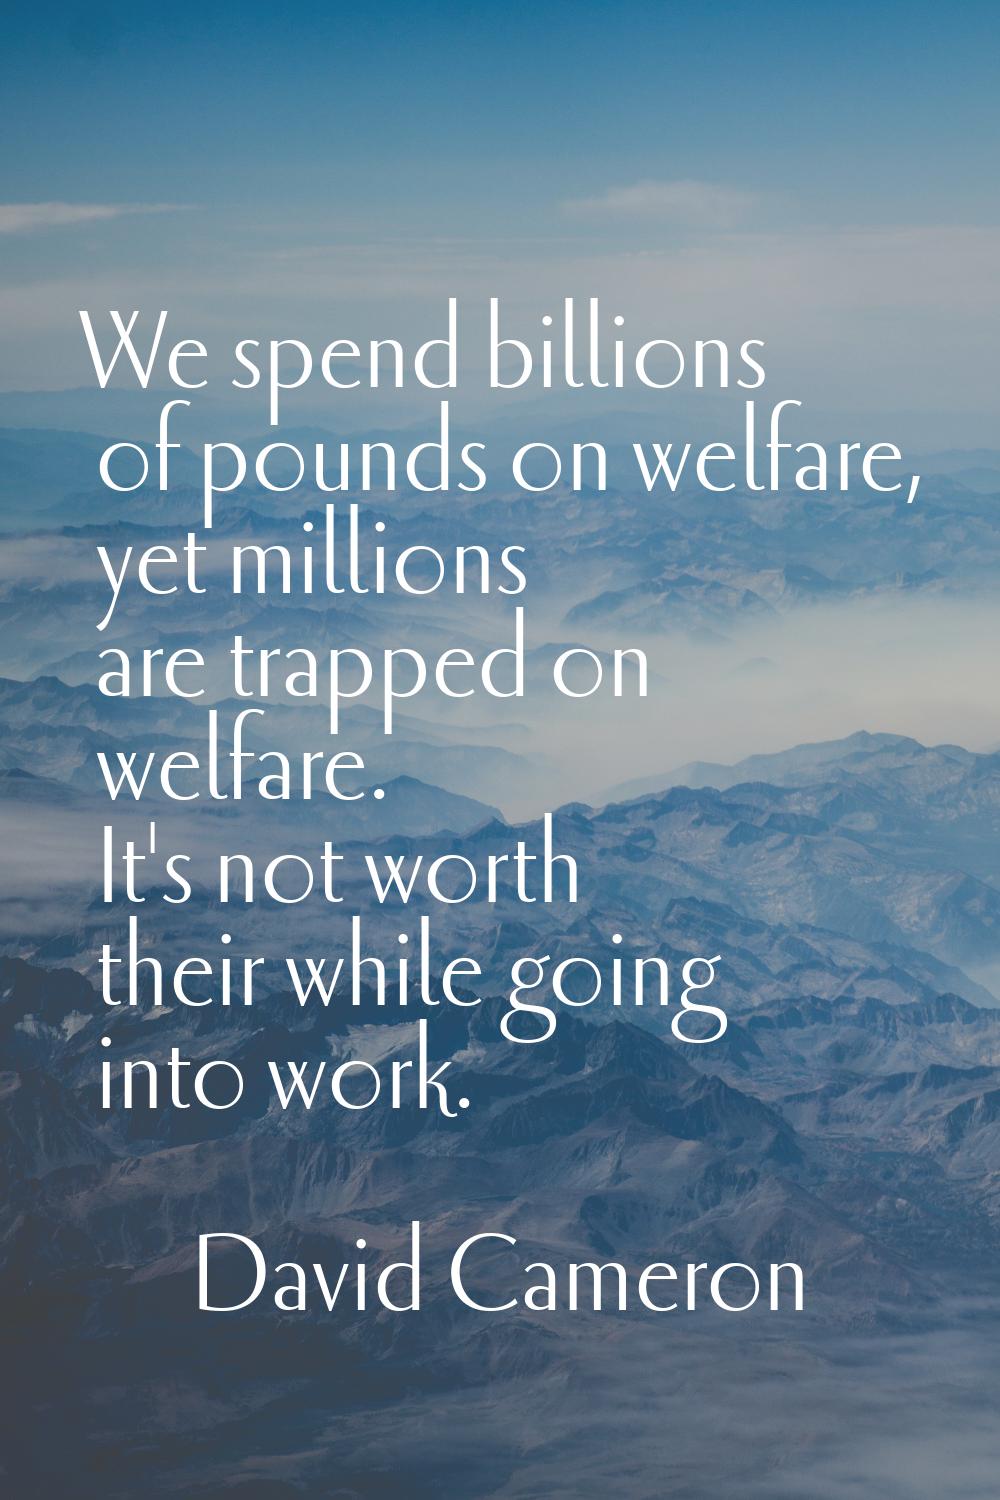 We spend billions of pounds on welfare, yet millions are trapped on welfare. It's not worth their w